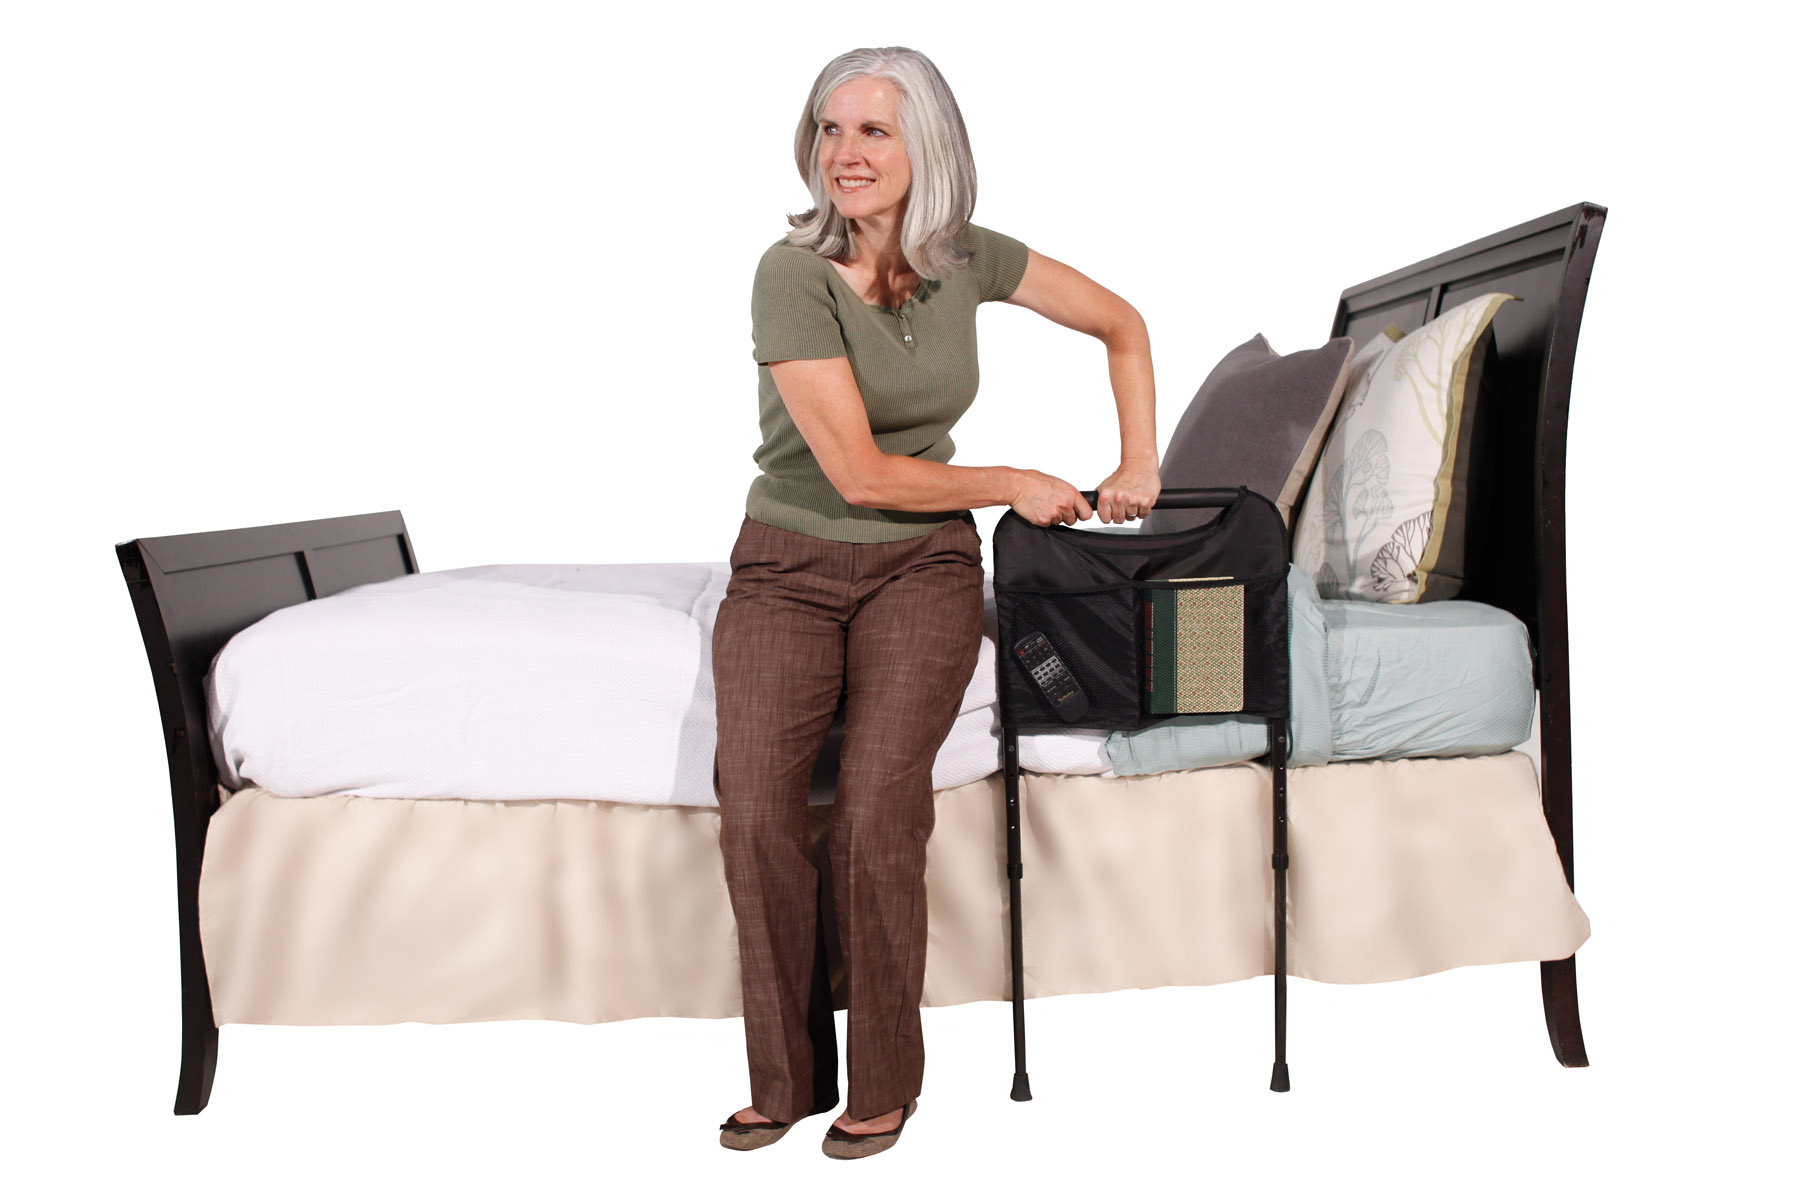 M-Rail Bedside Assist, The Reliable Bed Handrail